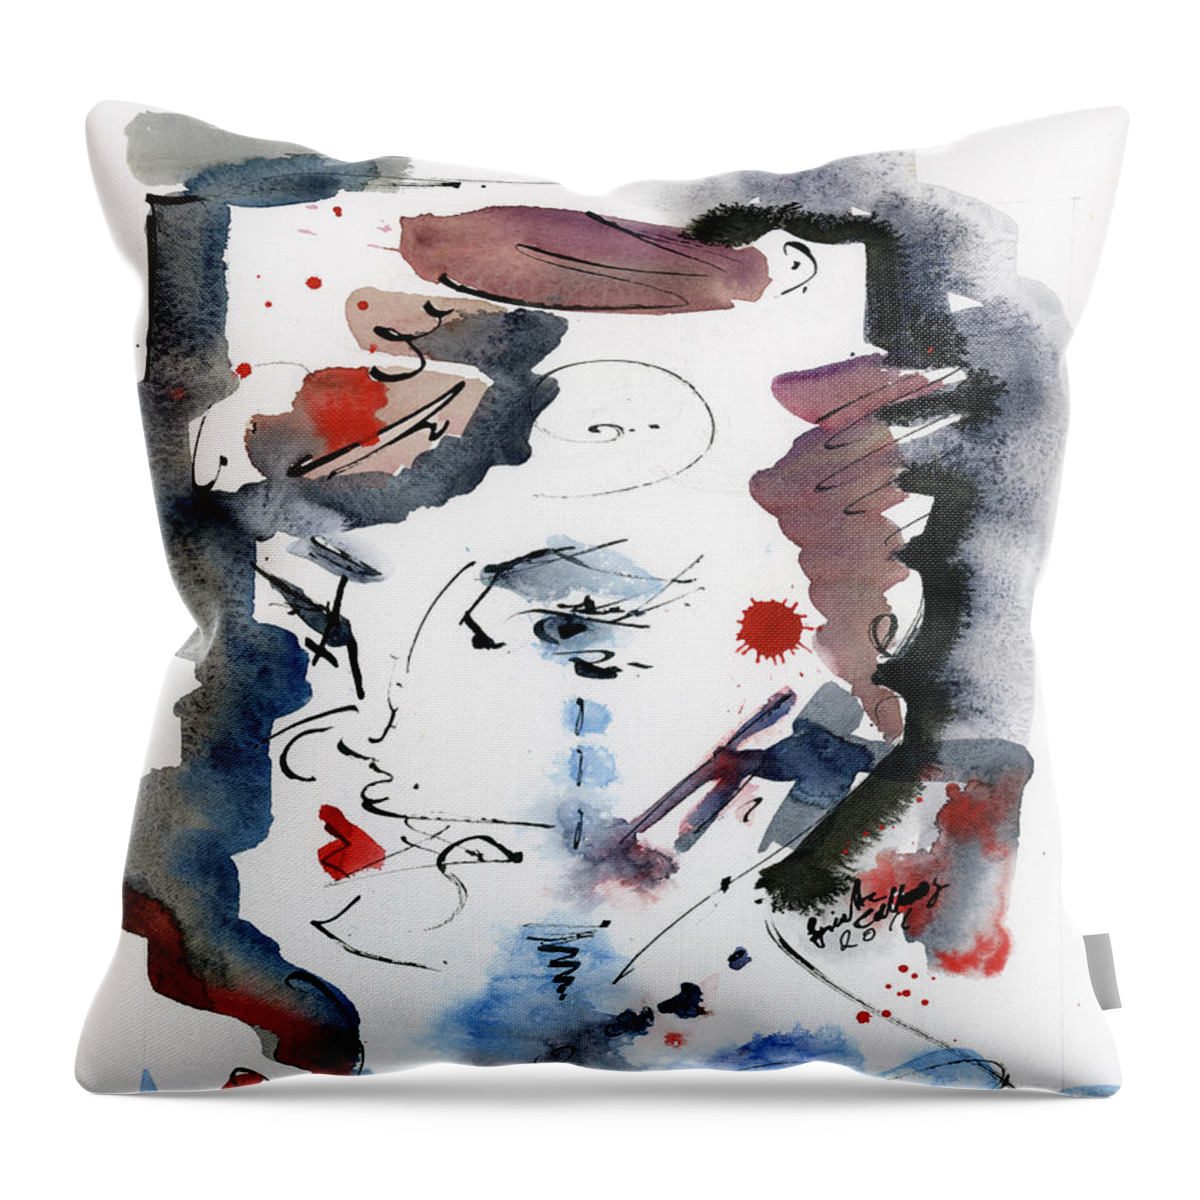 Abstract Watercolors Throw Pillow featuring the painting Intuitive Abstract Face V3 by Ginette Callaway